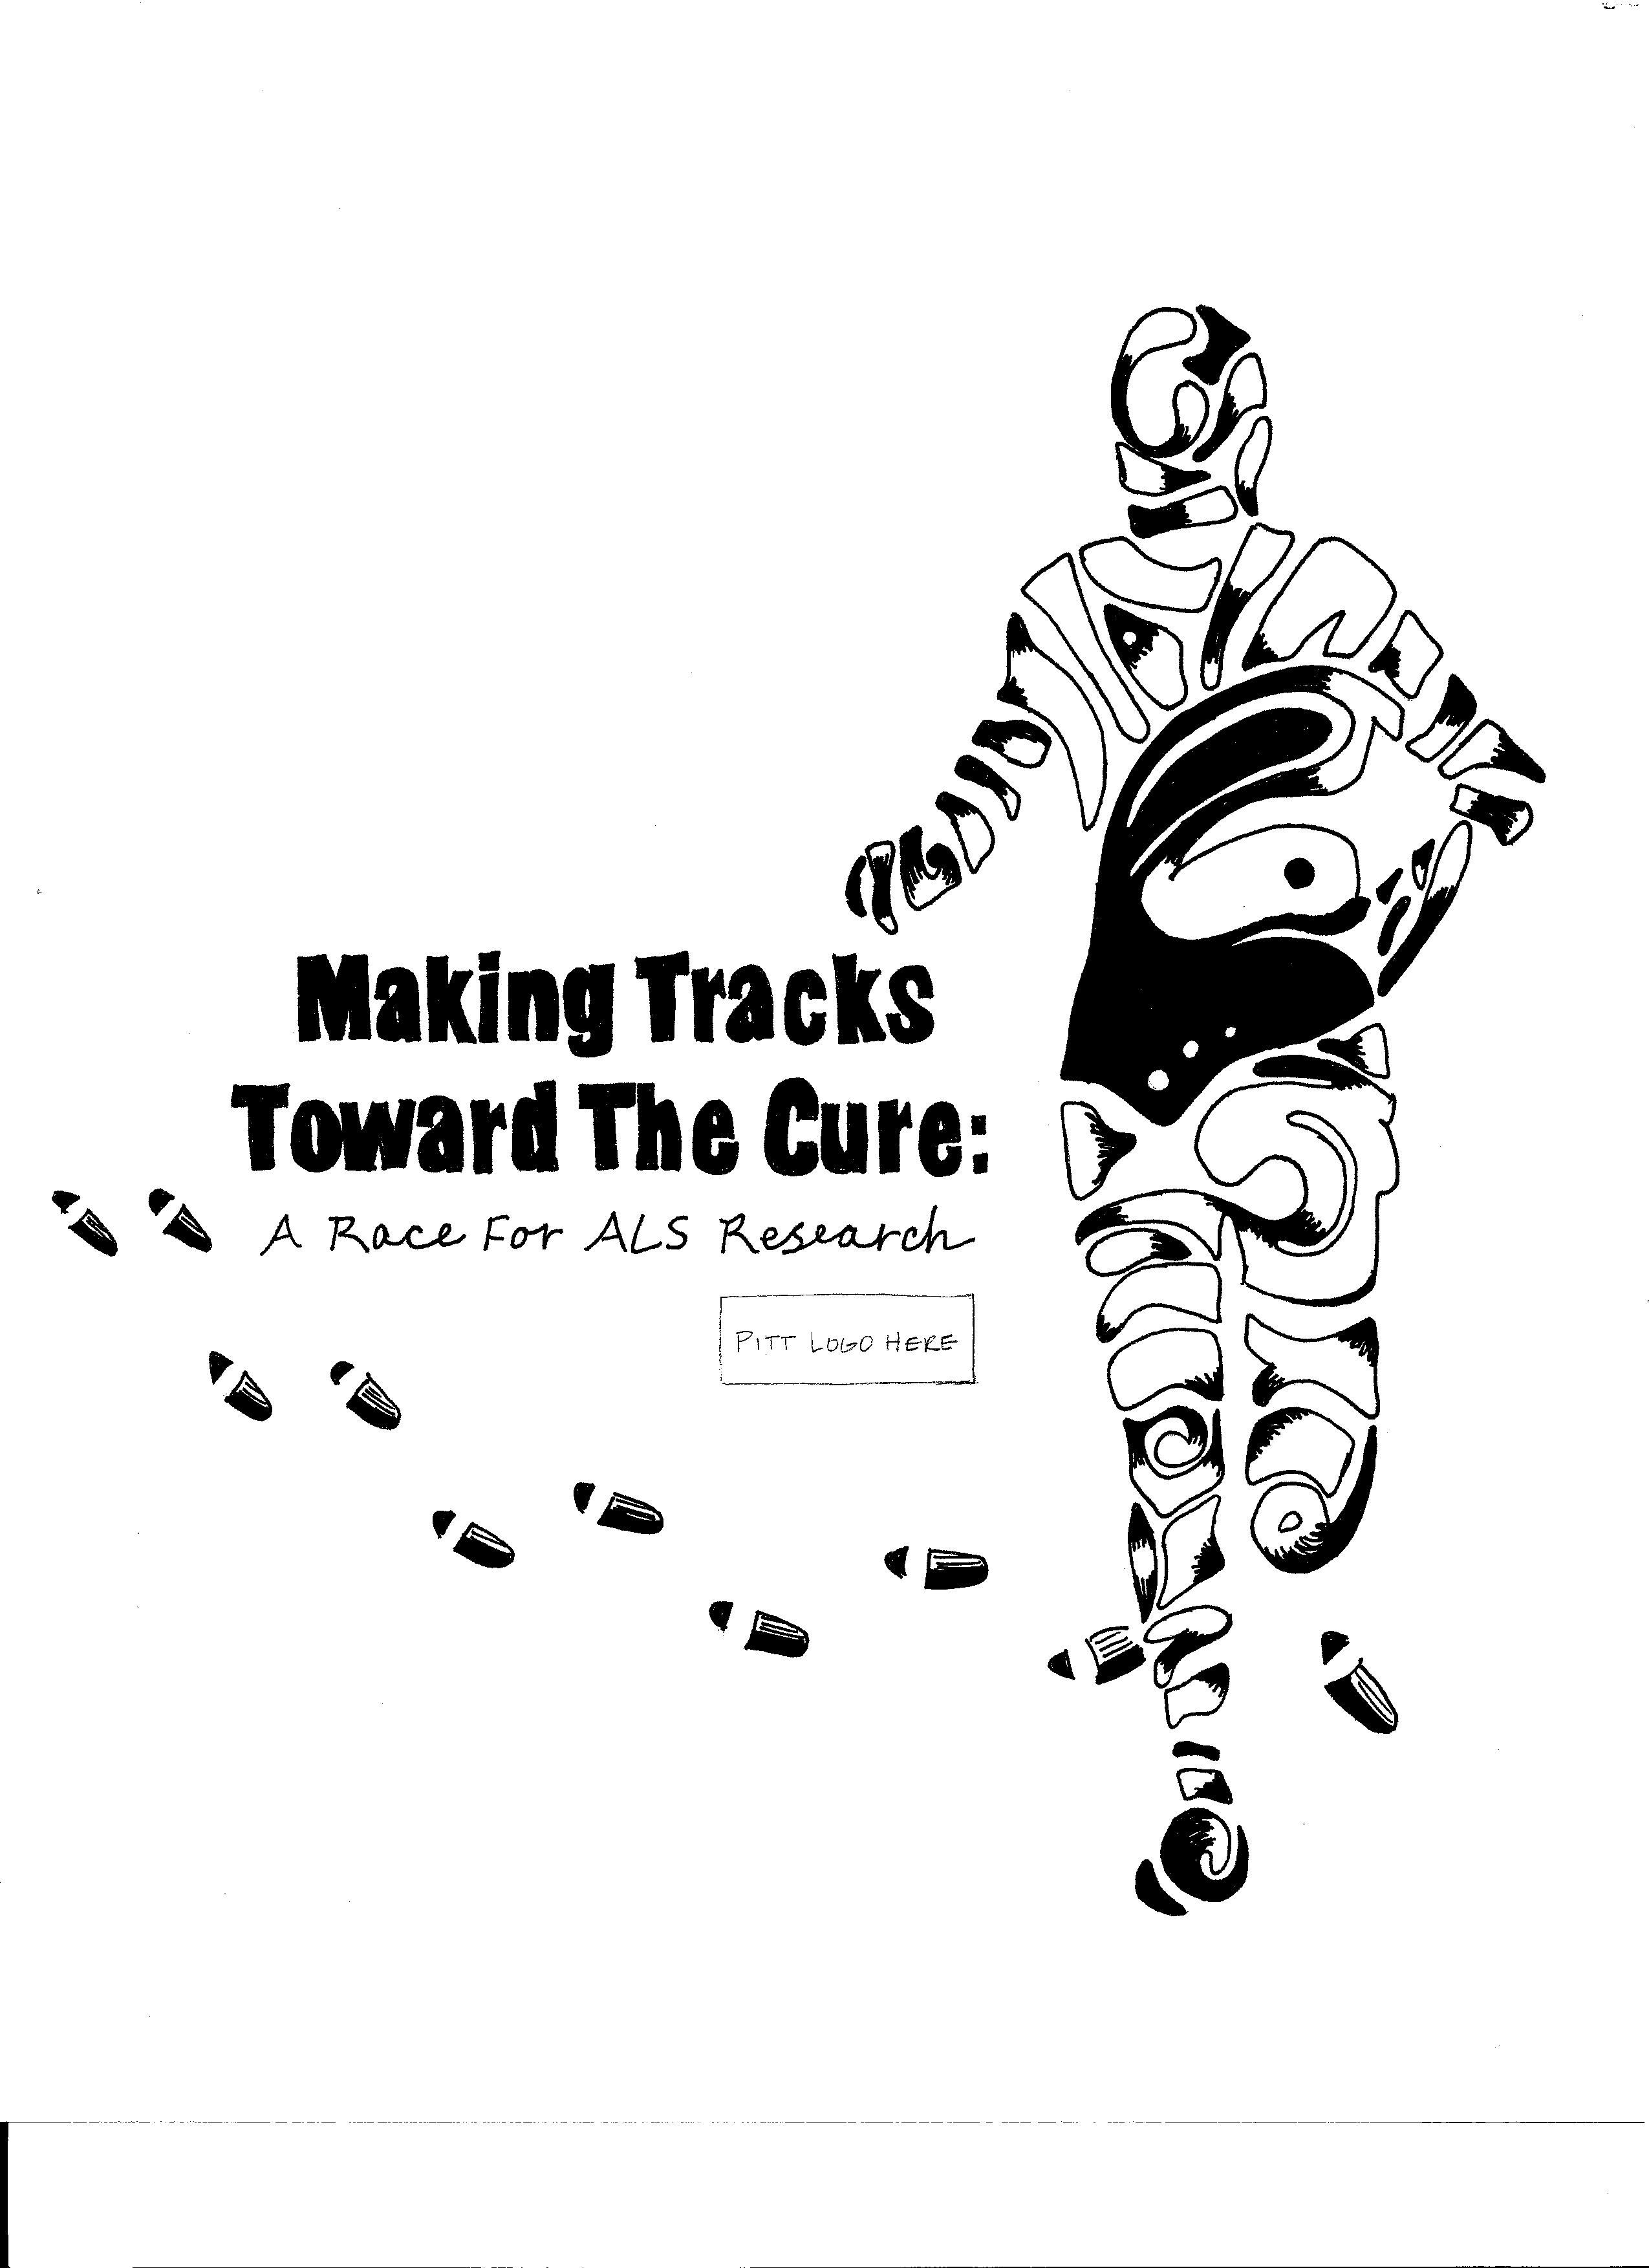 Making Tracks Toward the Cure: A Race for ALS